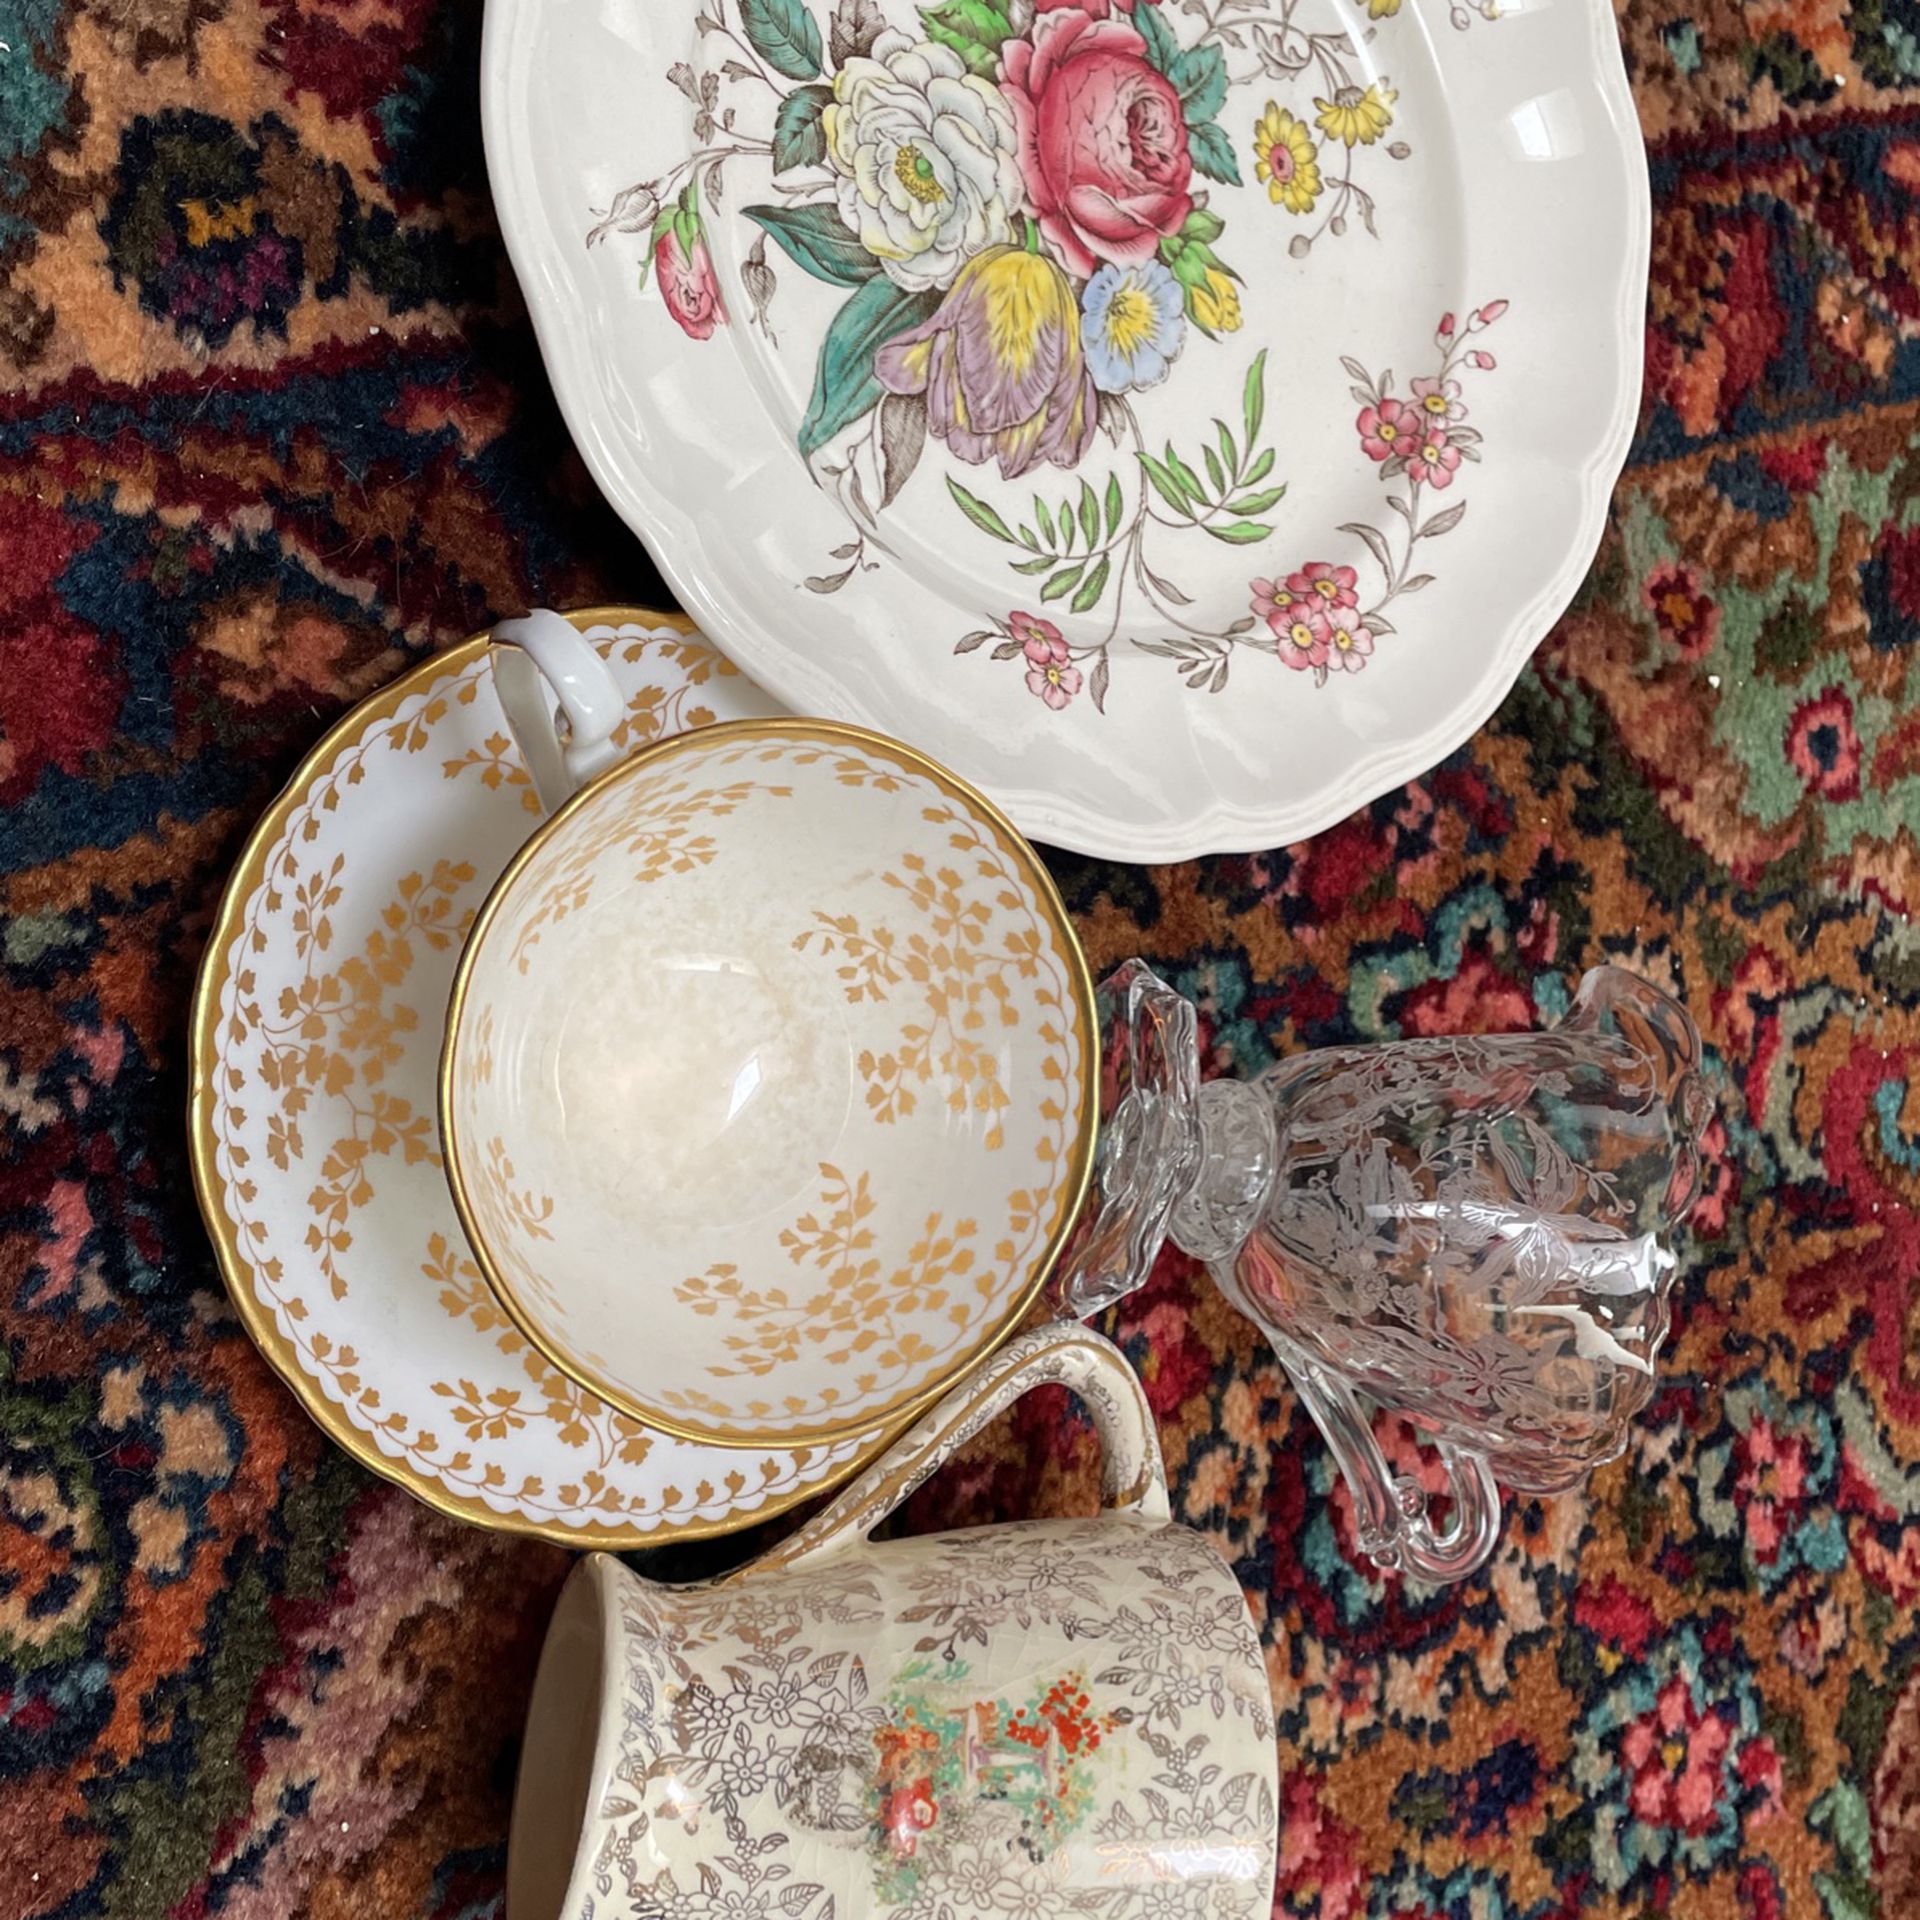 Collection of fine China: Spode plate,  EmpirE Pitcher and Royal Chelsea Cup and Saucer